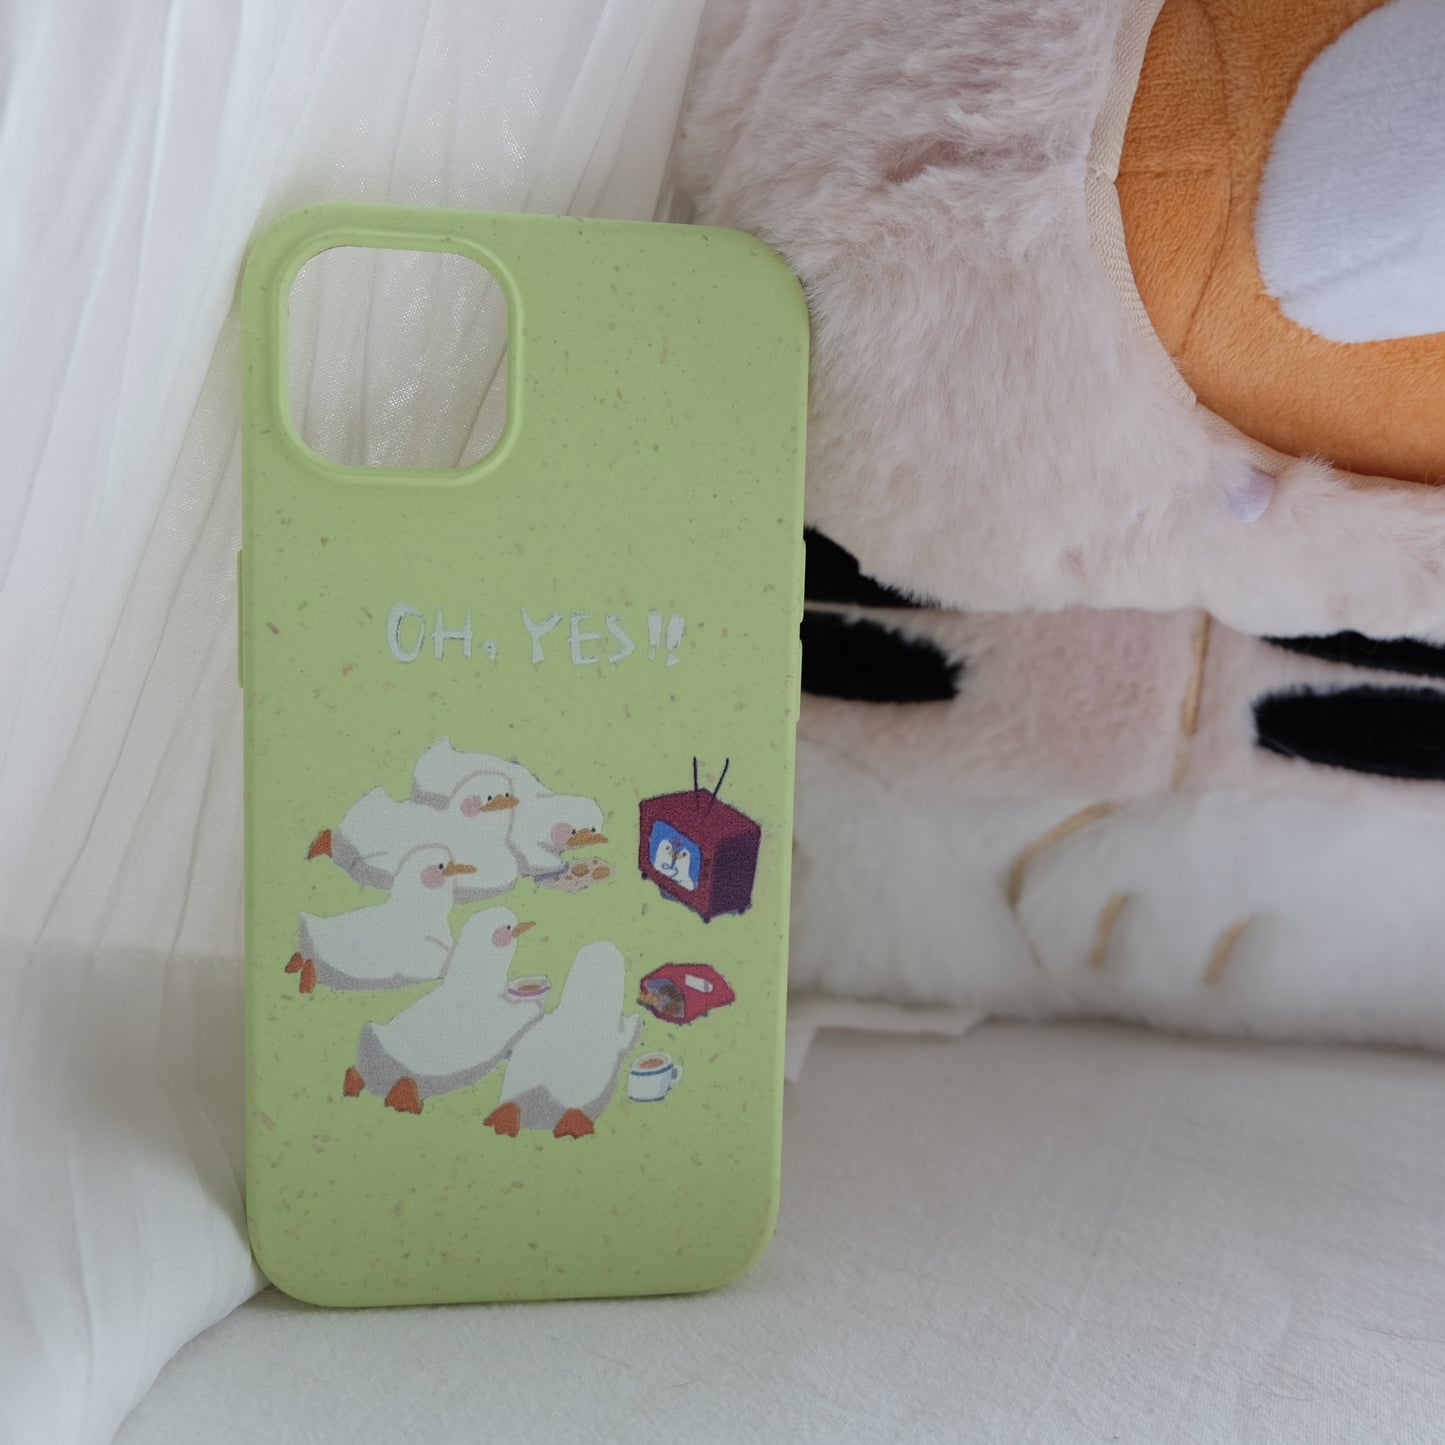 Watching tv goose degradable phone case